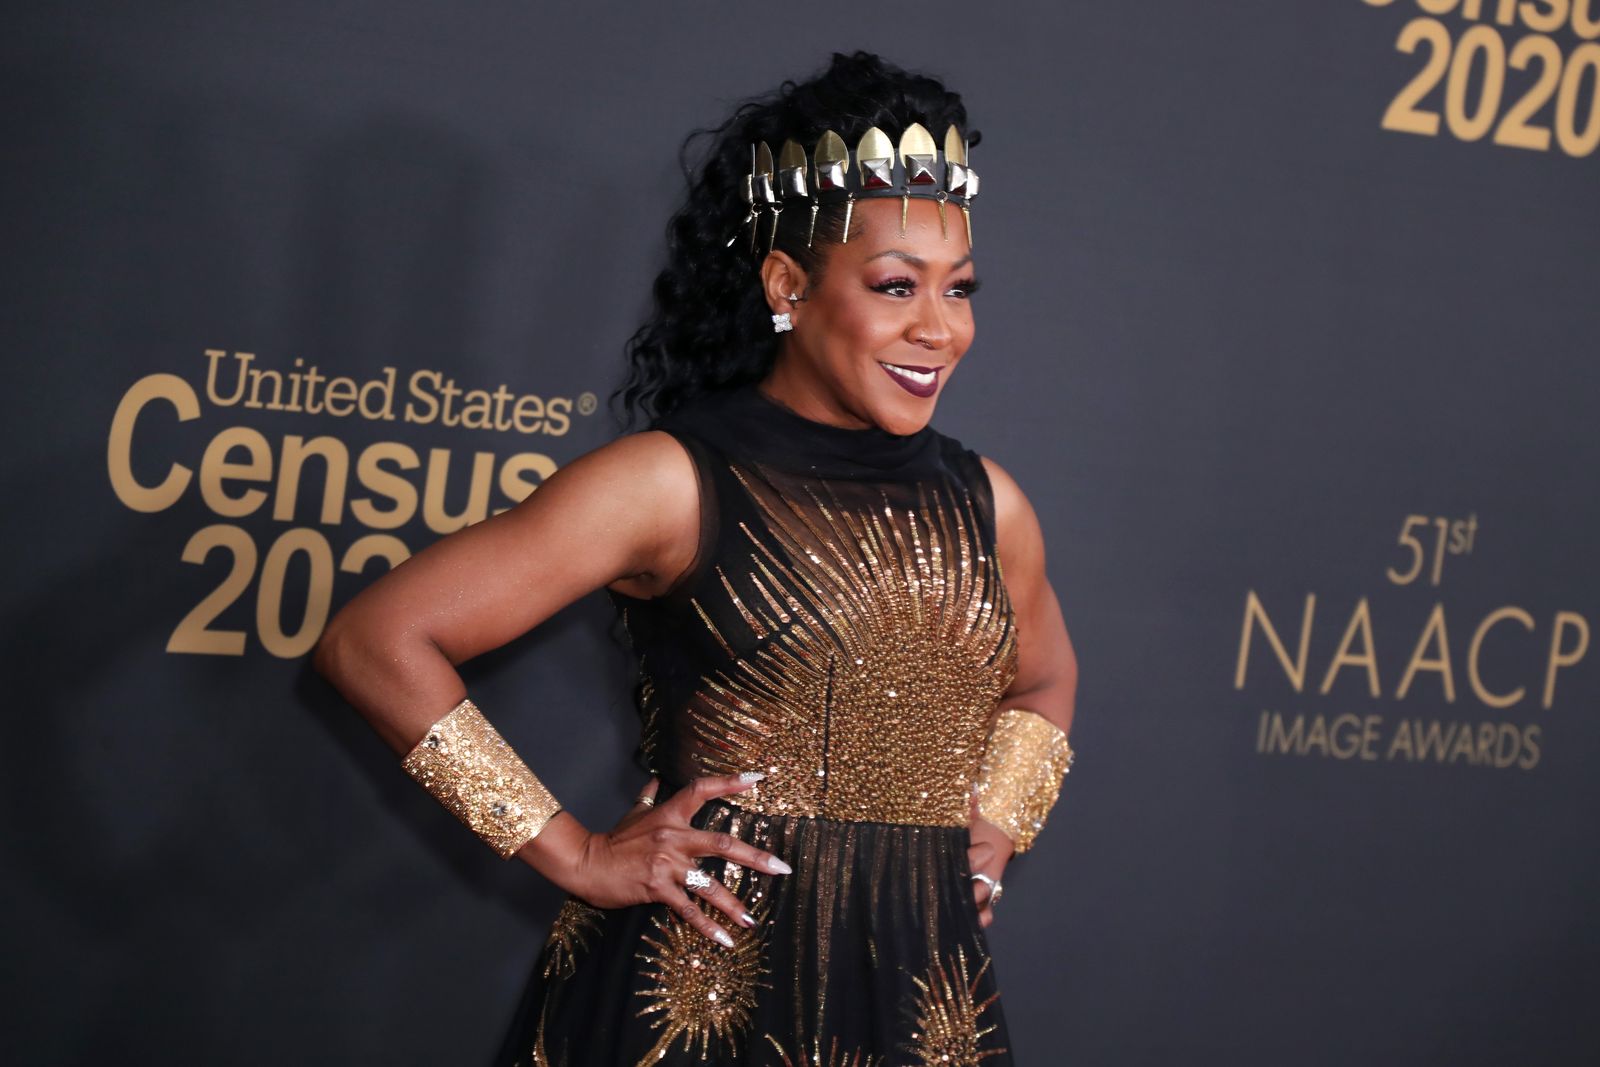 Tichina Arnold at the 51st NAACP Image Awards, 2020 in Pasadena, California | Source: Getty Images